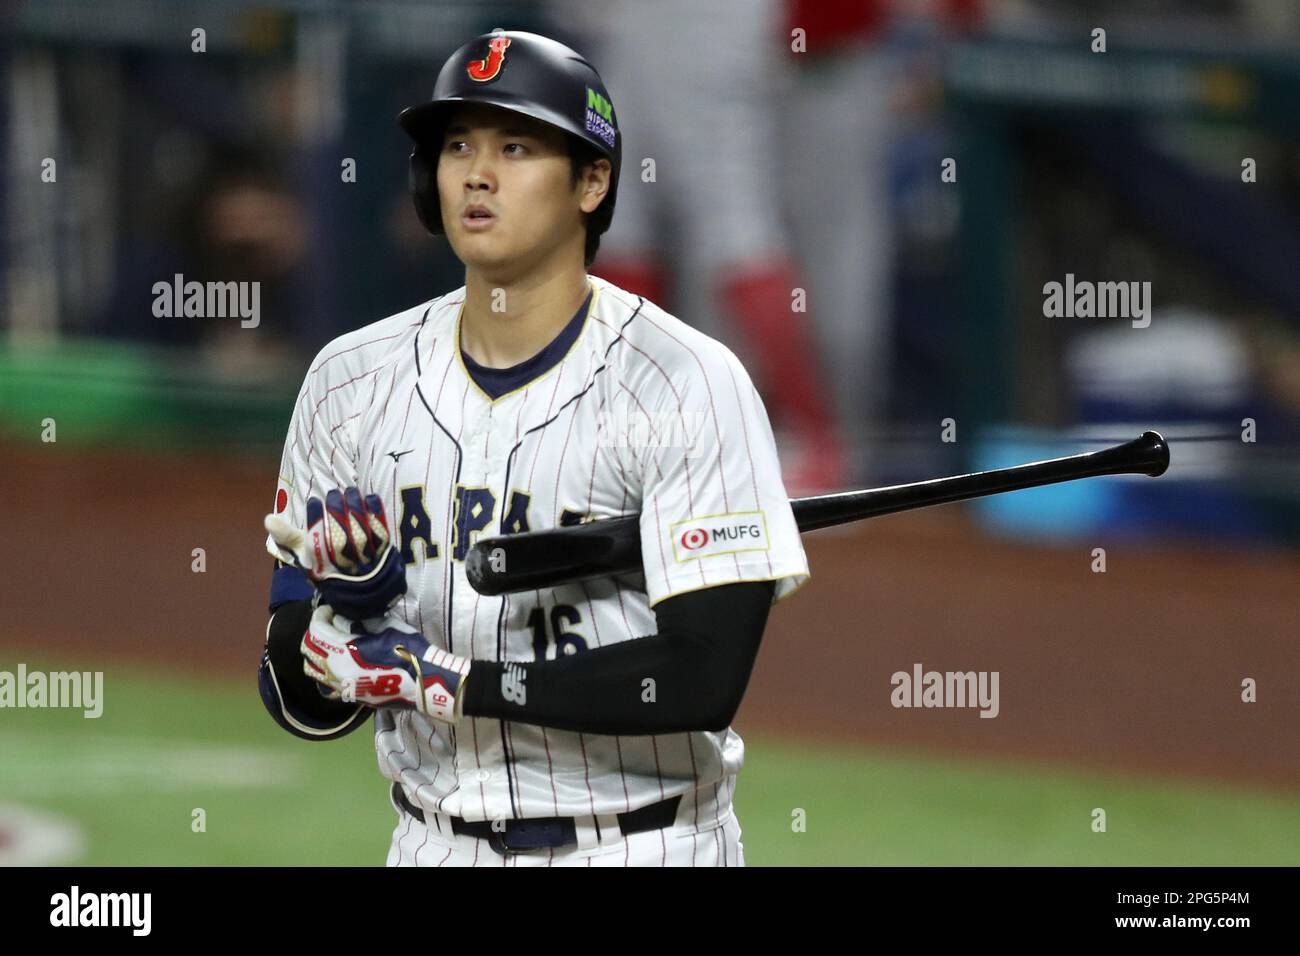 Miami, United States. 20th Mar, 2023. Japan's Shohei Ohtani (16) removes his glove after striking out in the first inning of the 2023 World Baseball Classic semifinal game against Mexico in Miami, Florida on Monday, March 20, 2023. Photo by Aaron Josefczyk/UPI Credit: UPI/Alamy Live News Stock Photo